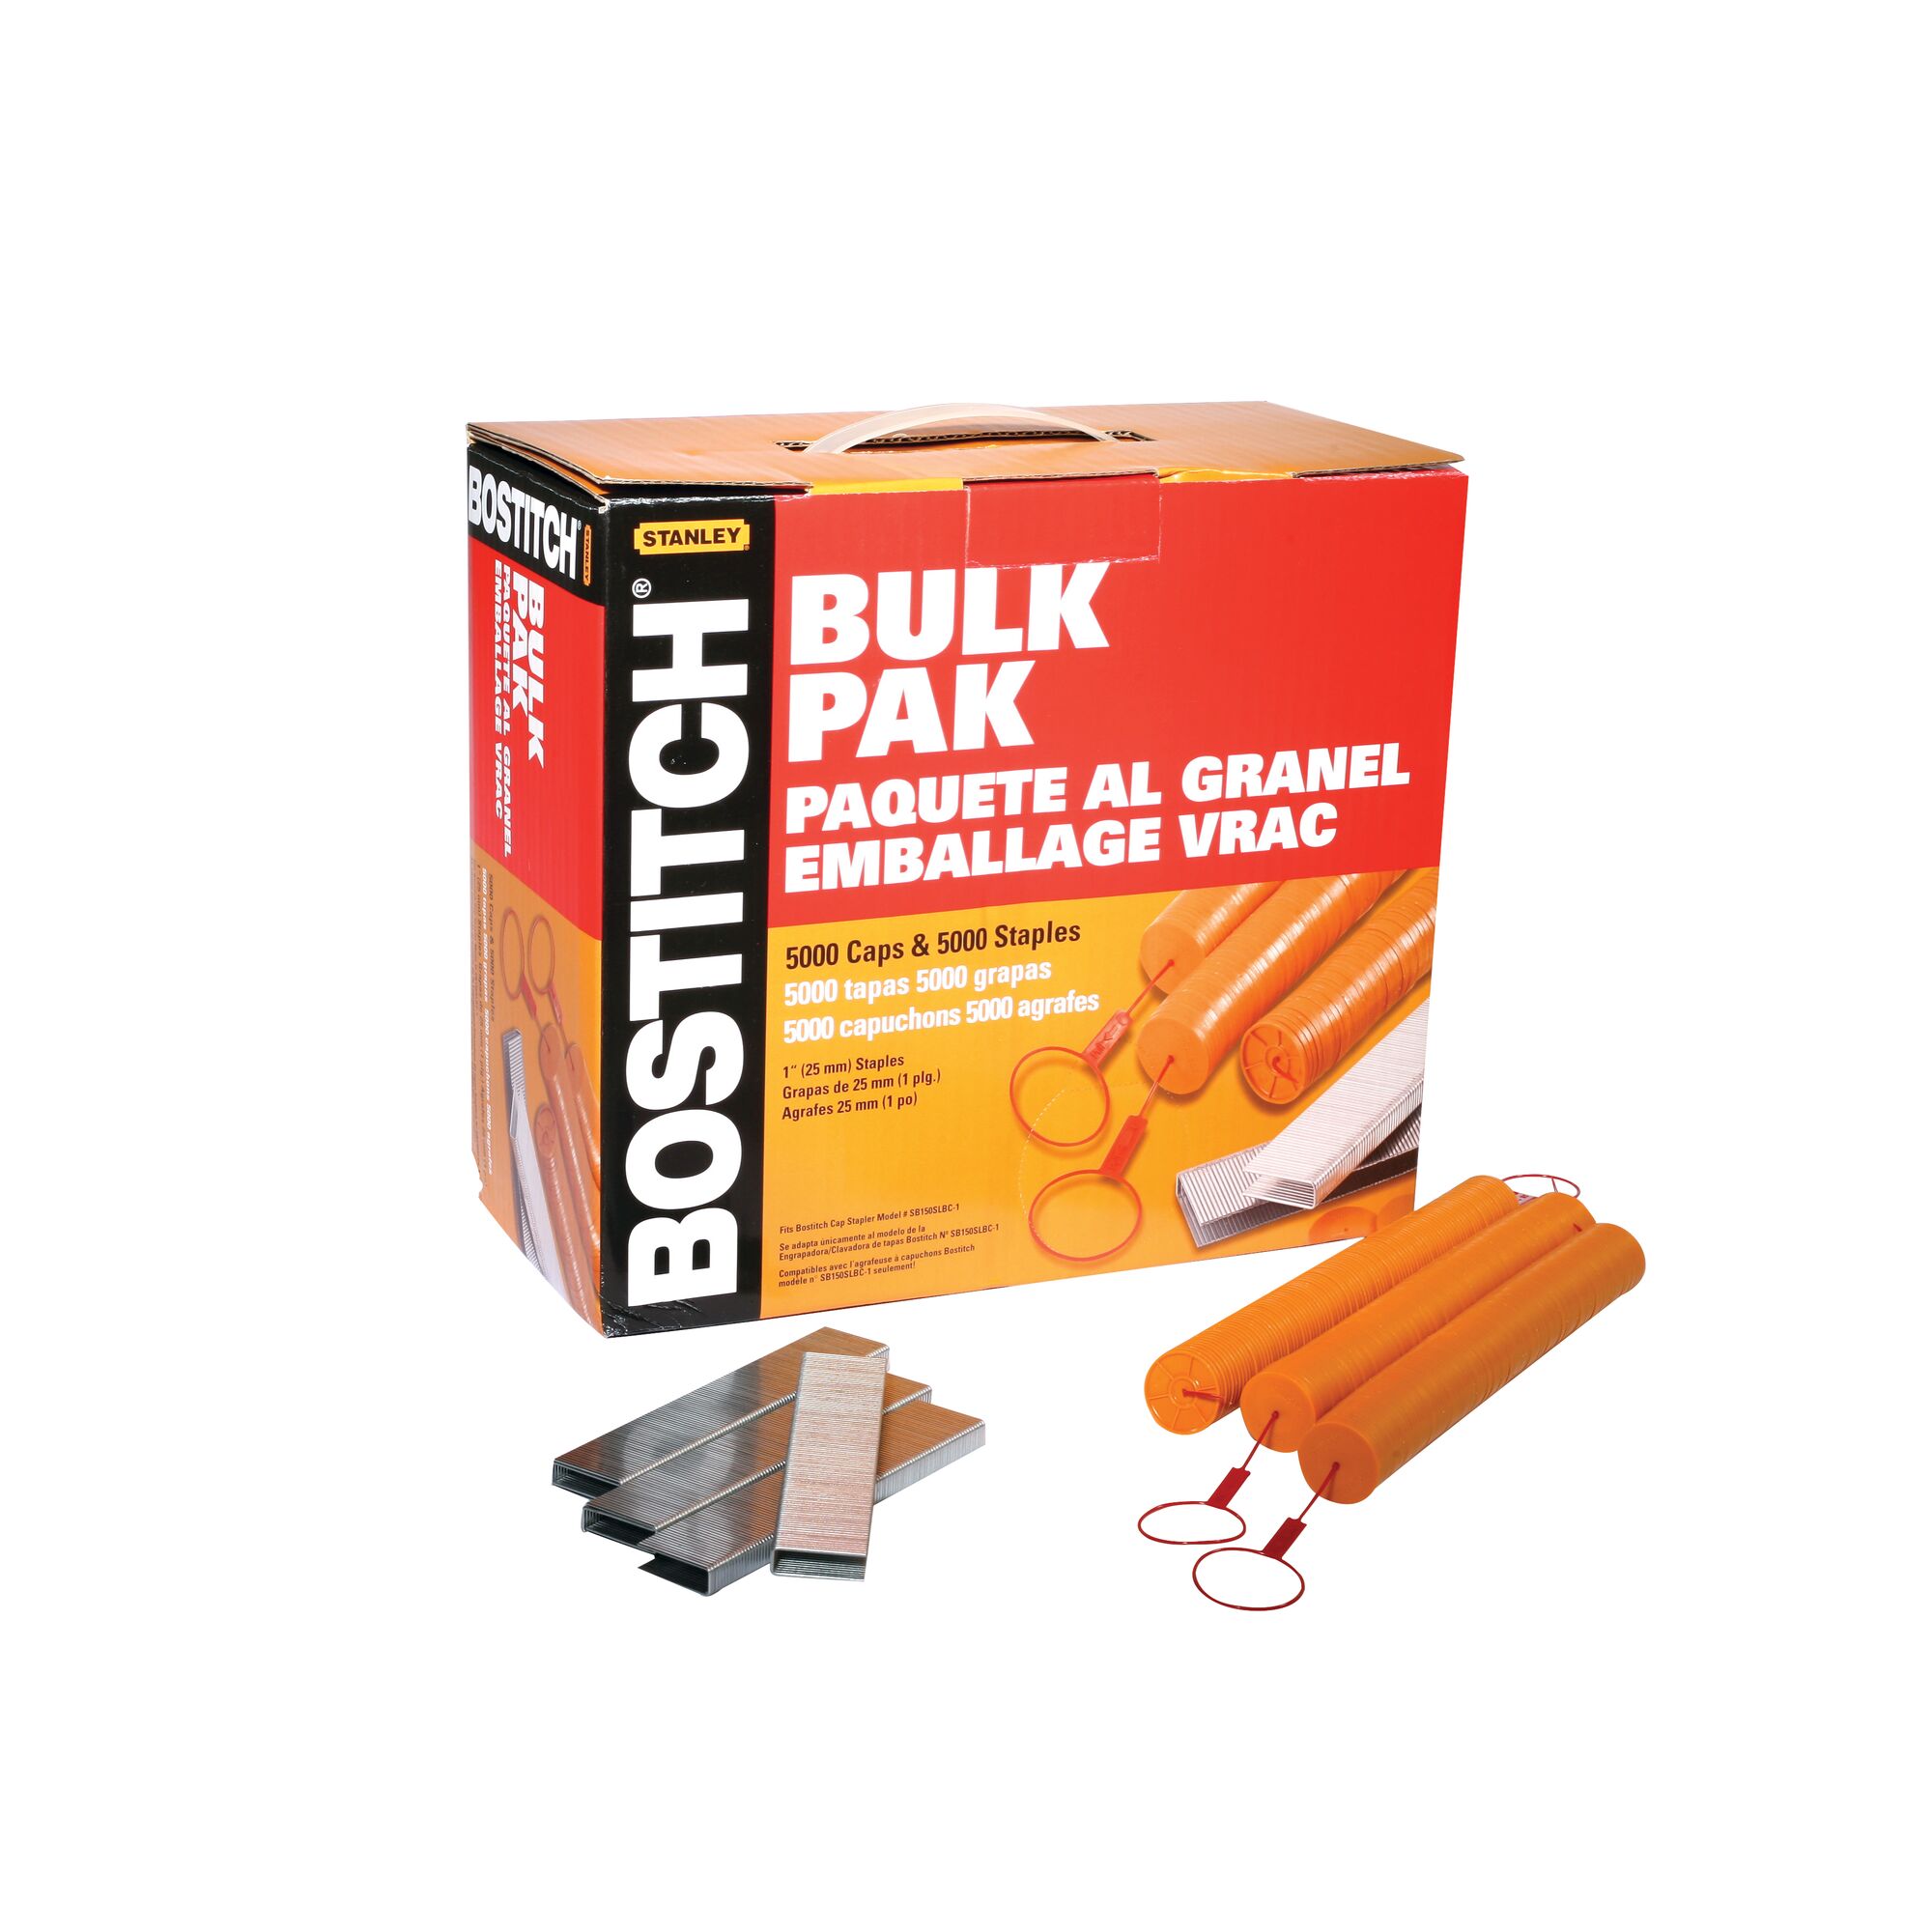 Bostitch 1-in Leg x 5/16-in Wide Crown Coated Collated Roofing